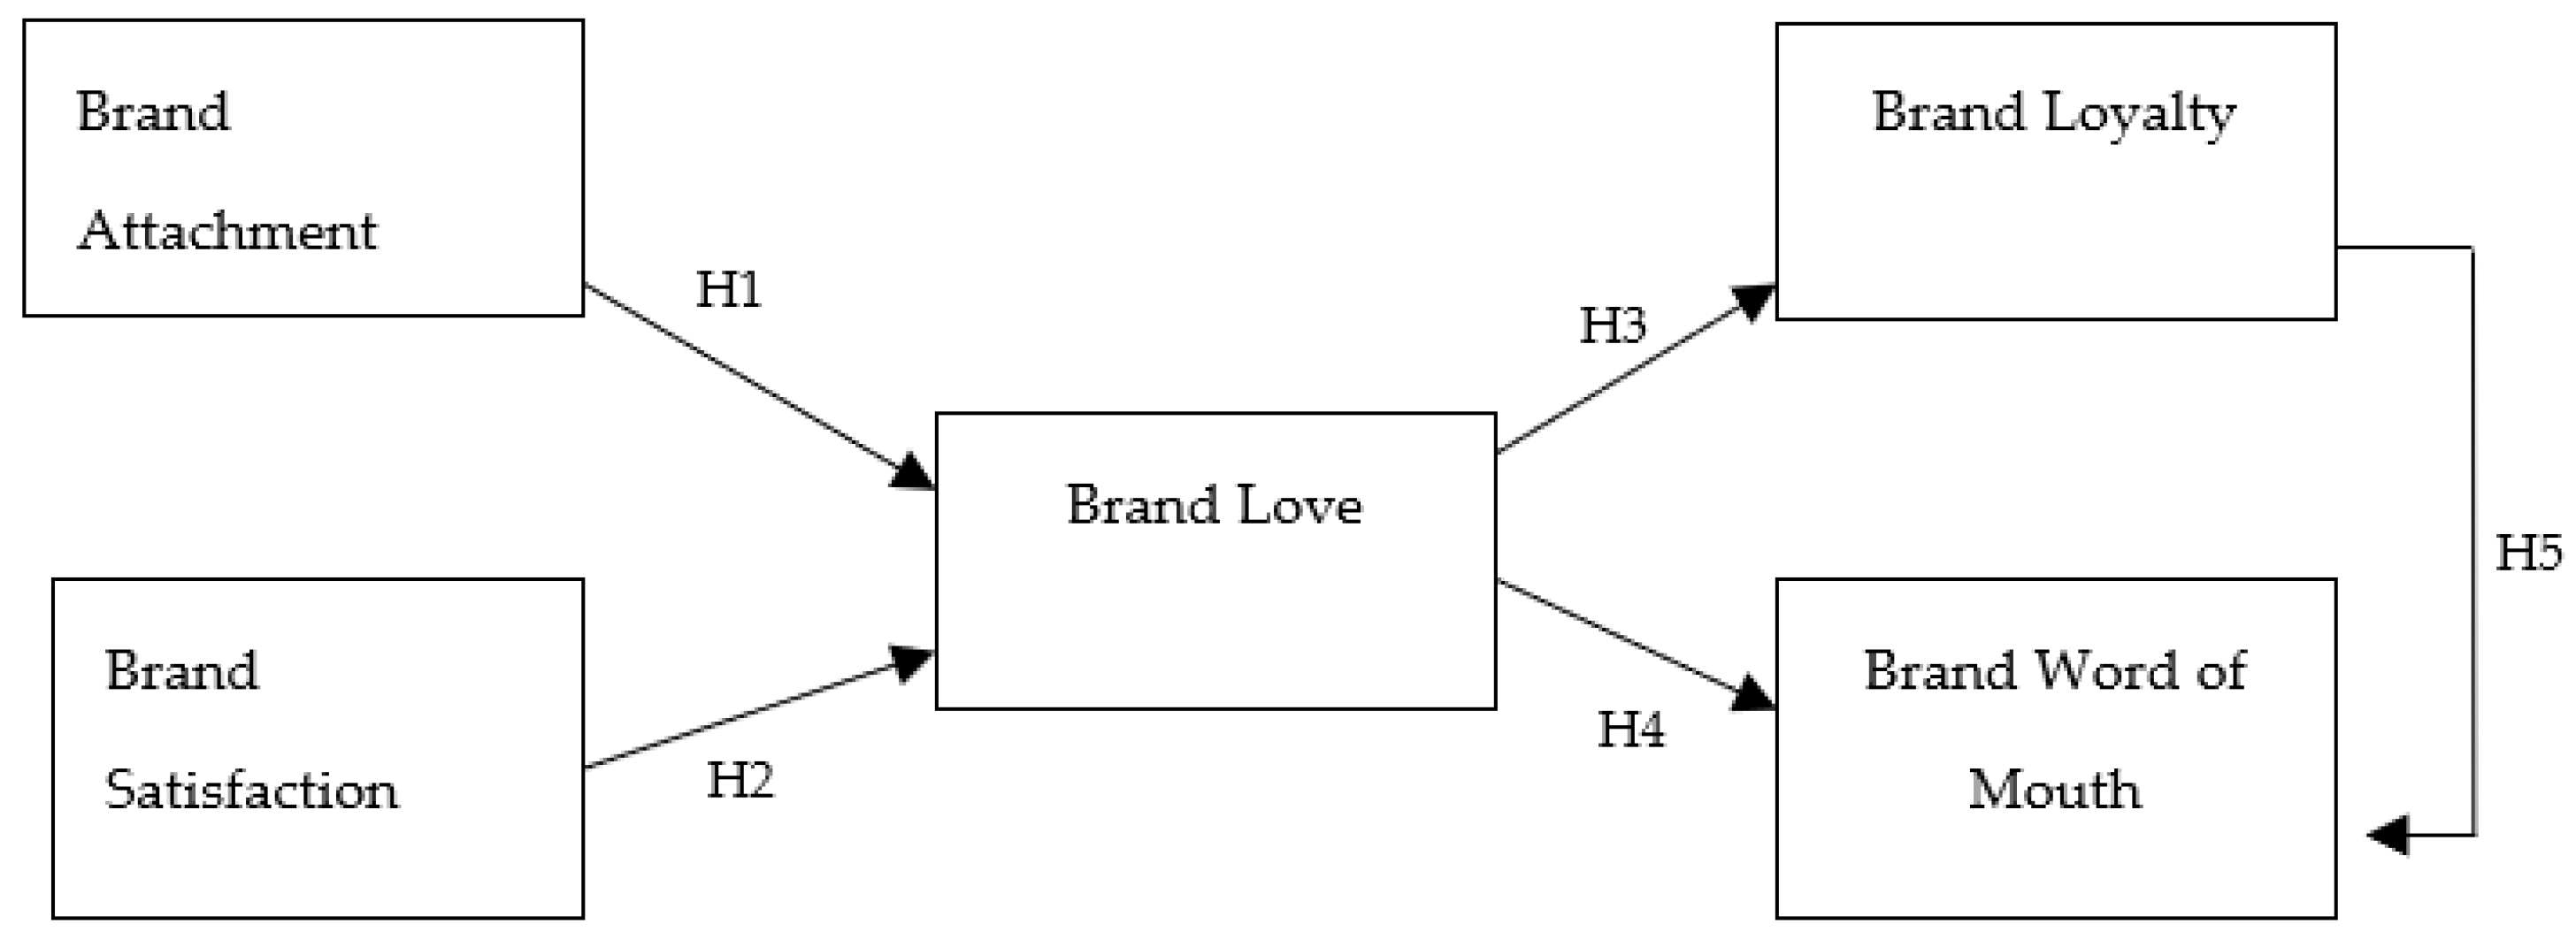 Discovering a passion for luxury brand management